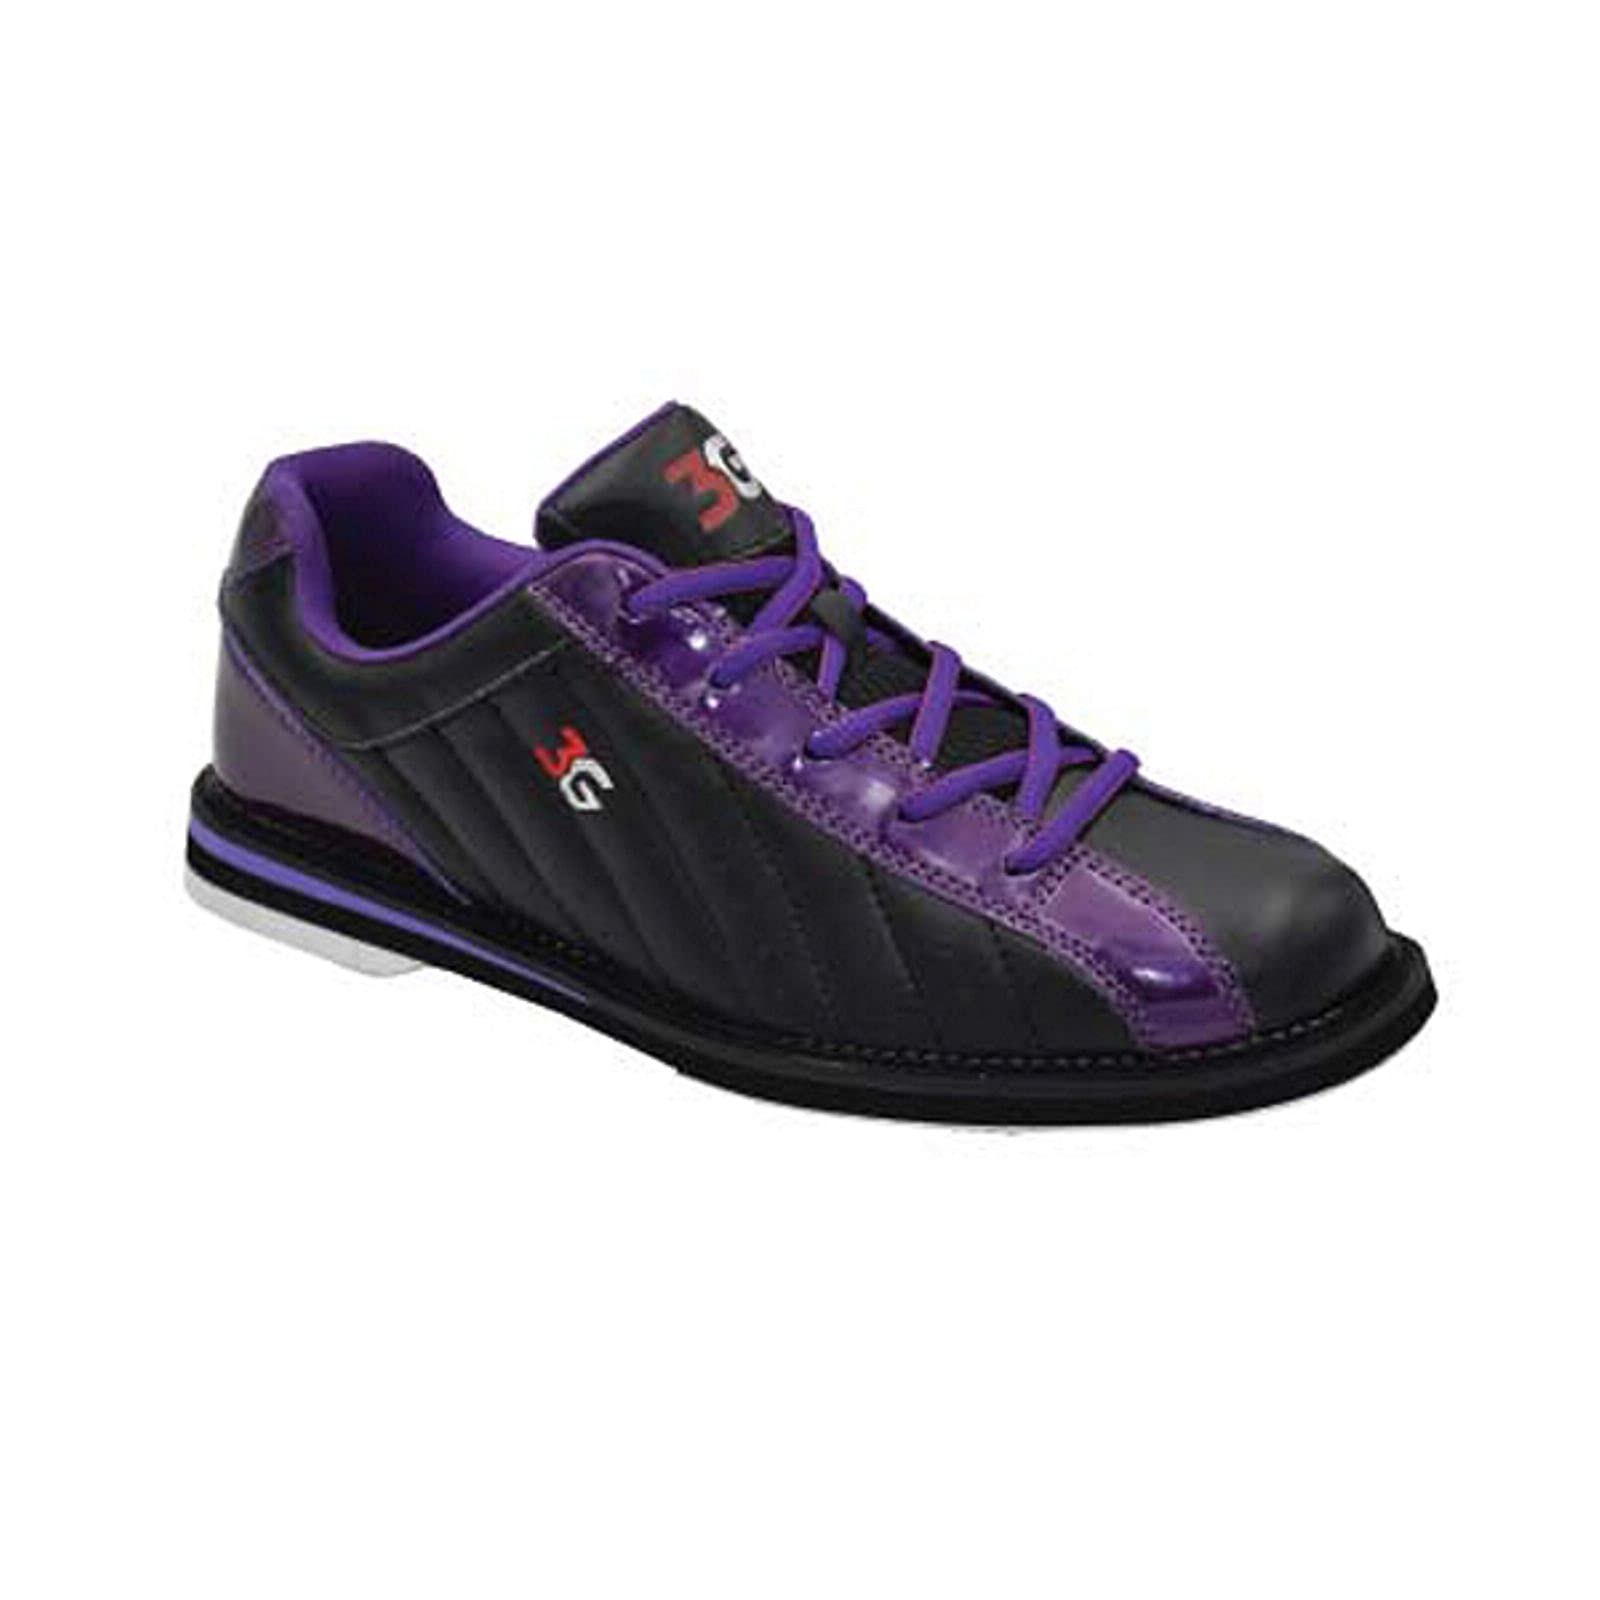 3G Unisex-Adult Bowling Shoes